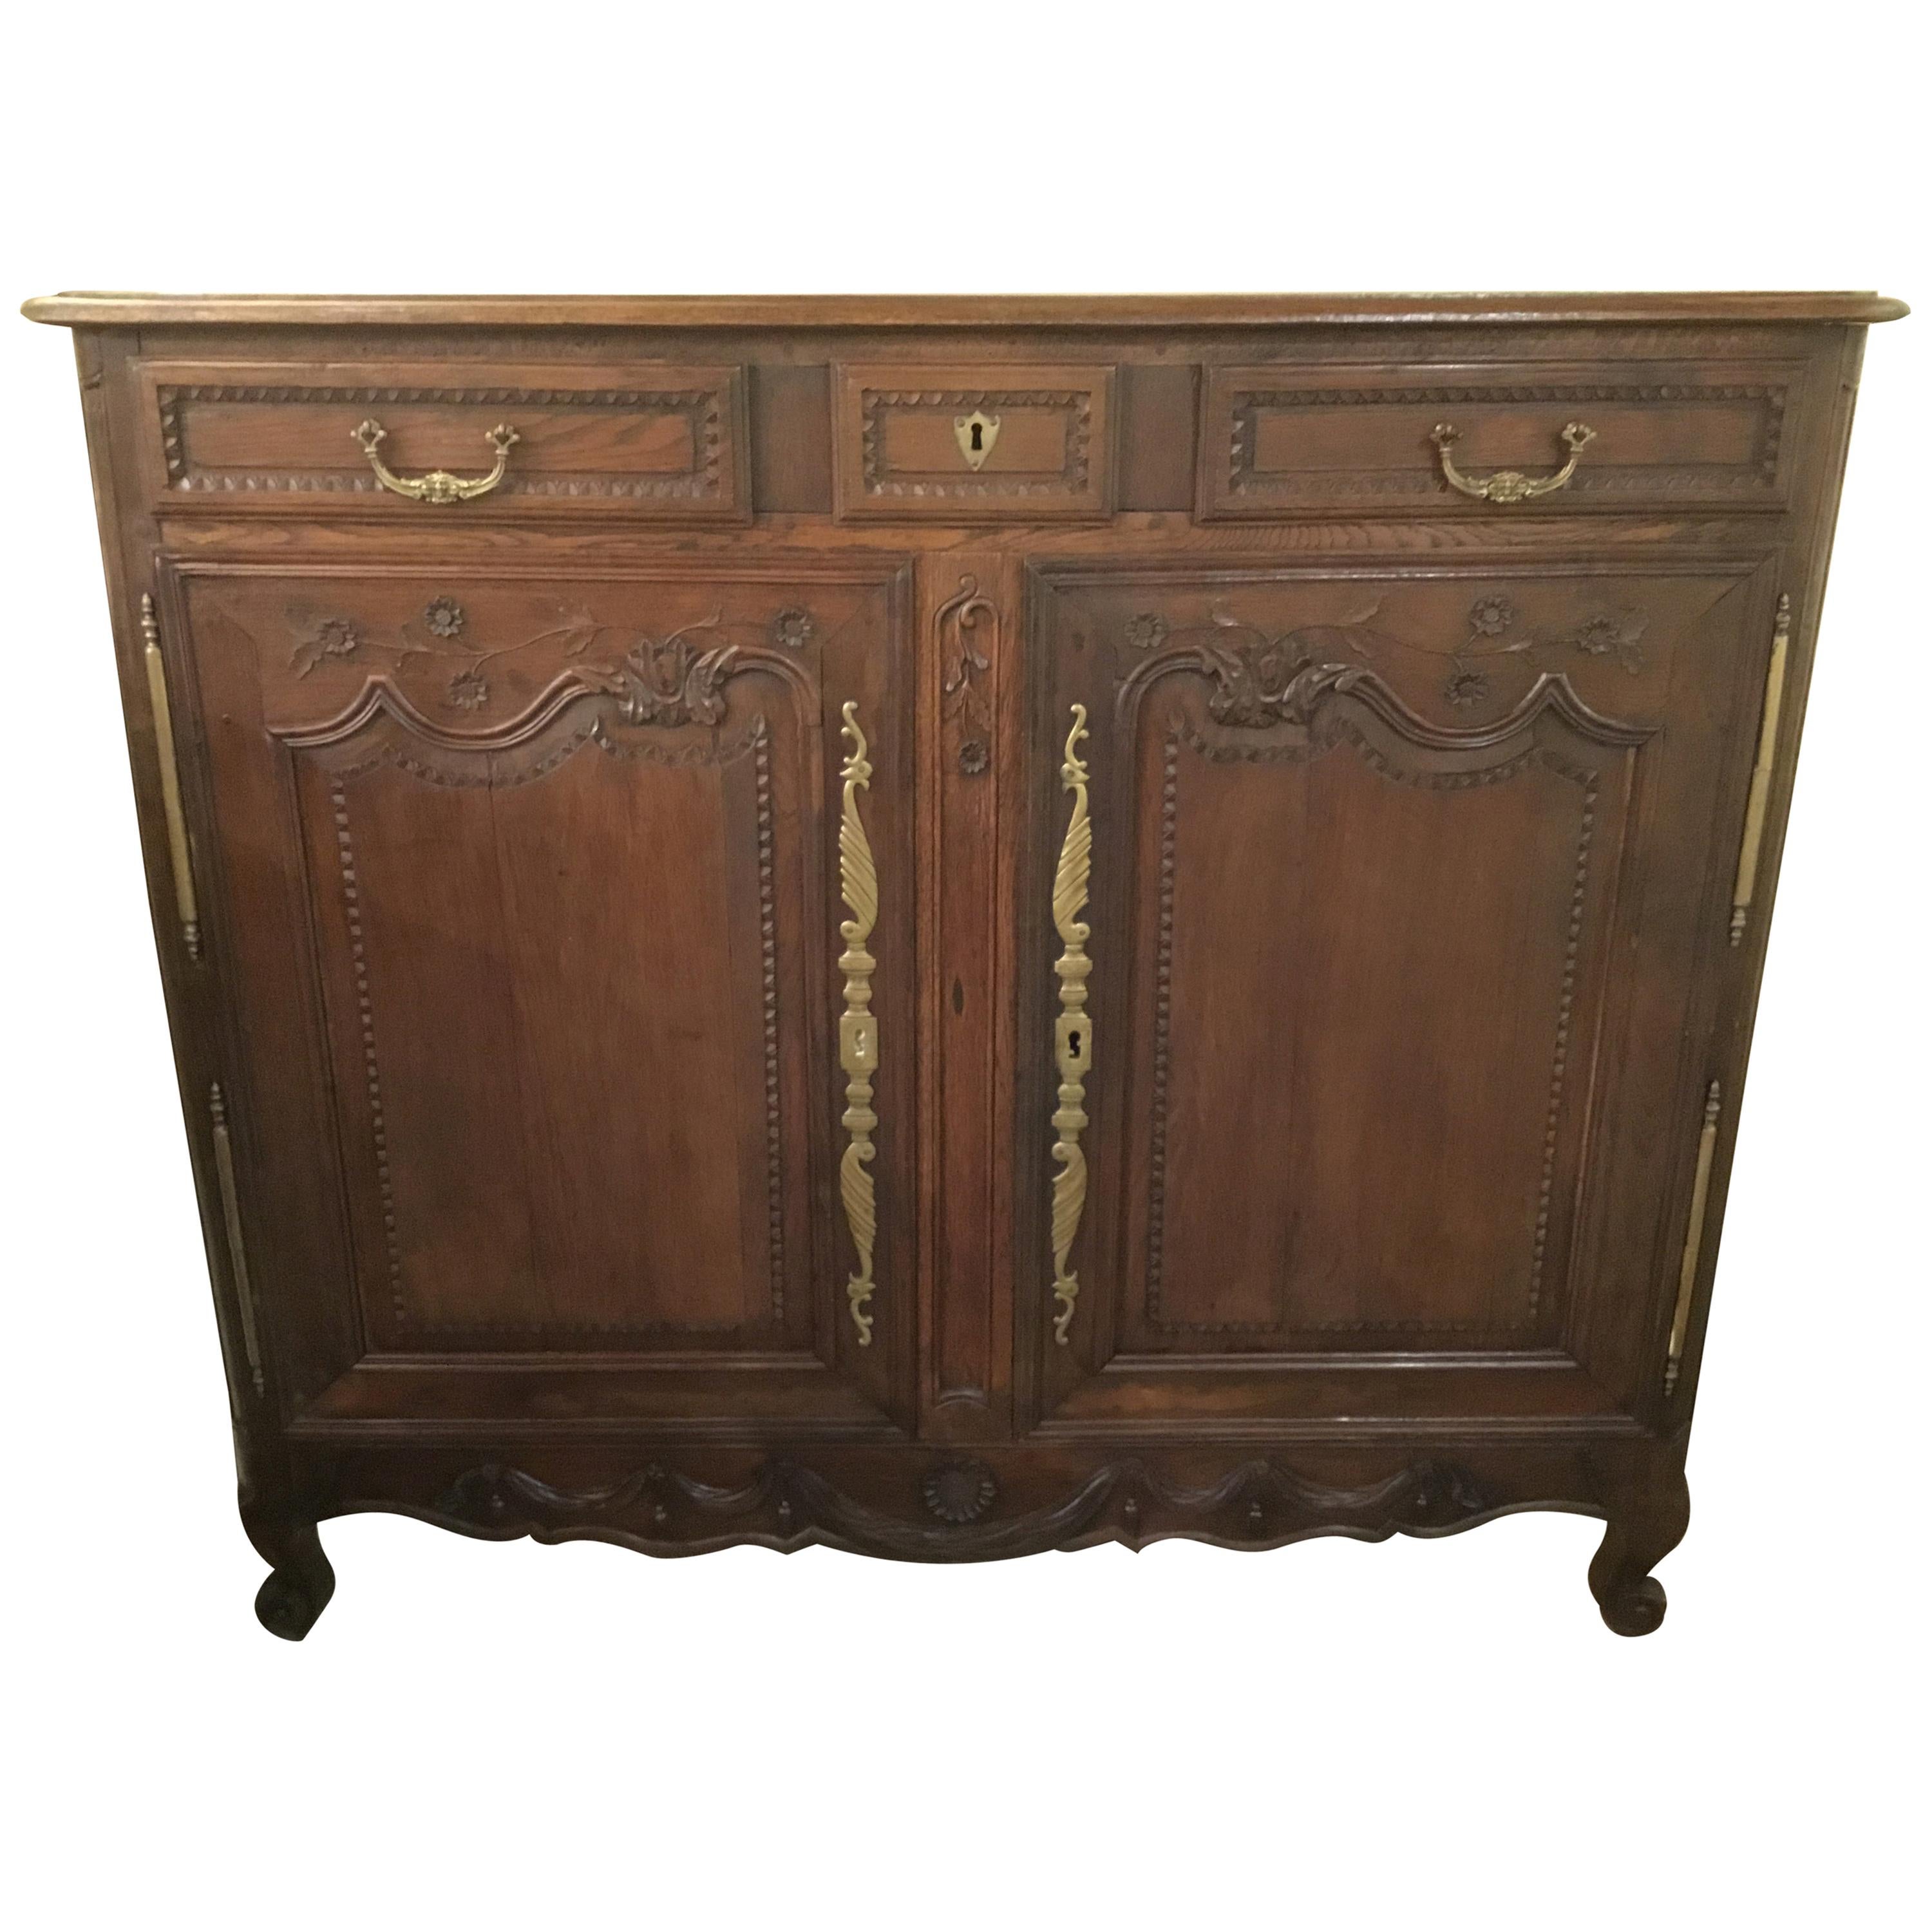 French Country Oakwood Carved Cabinet/Sideboard, circa Late 18th Century For Sale